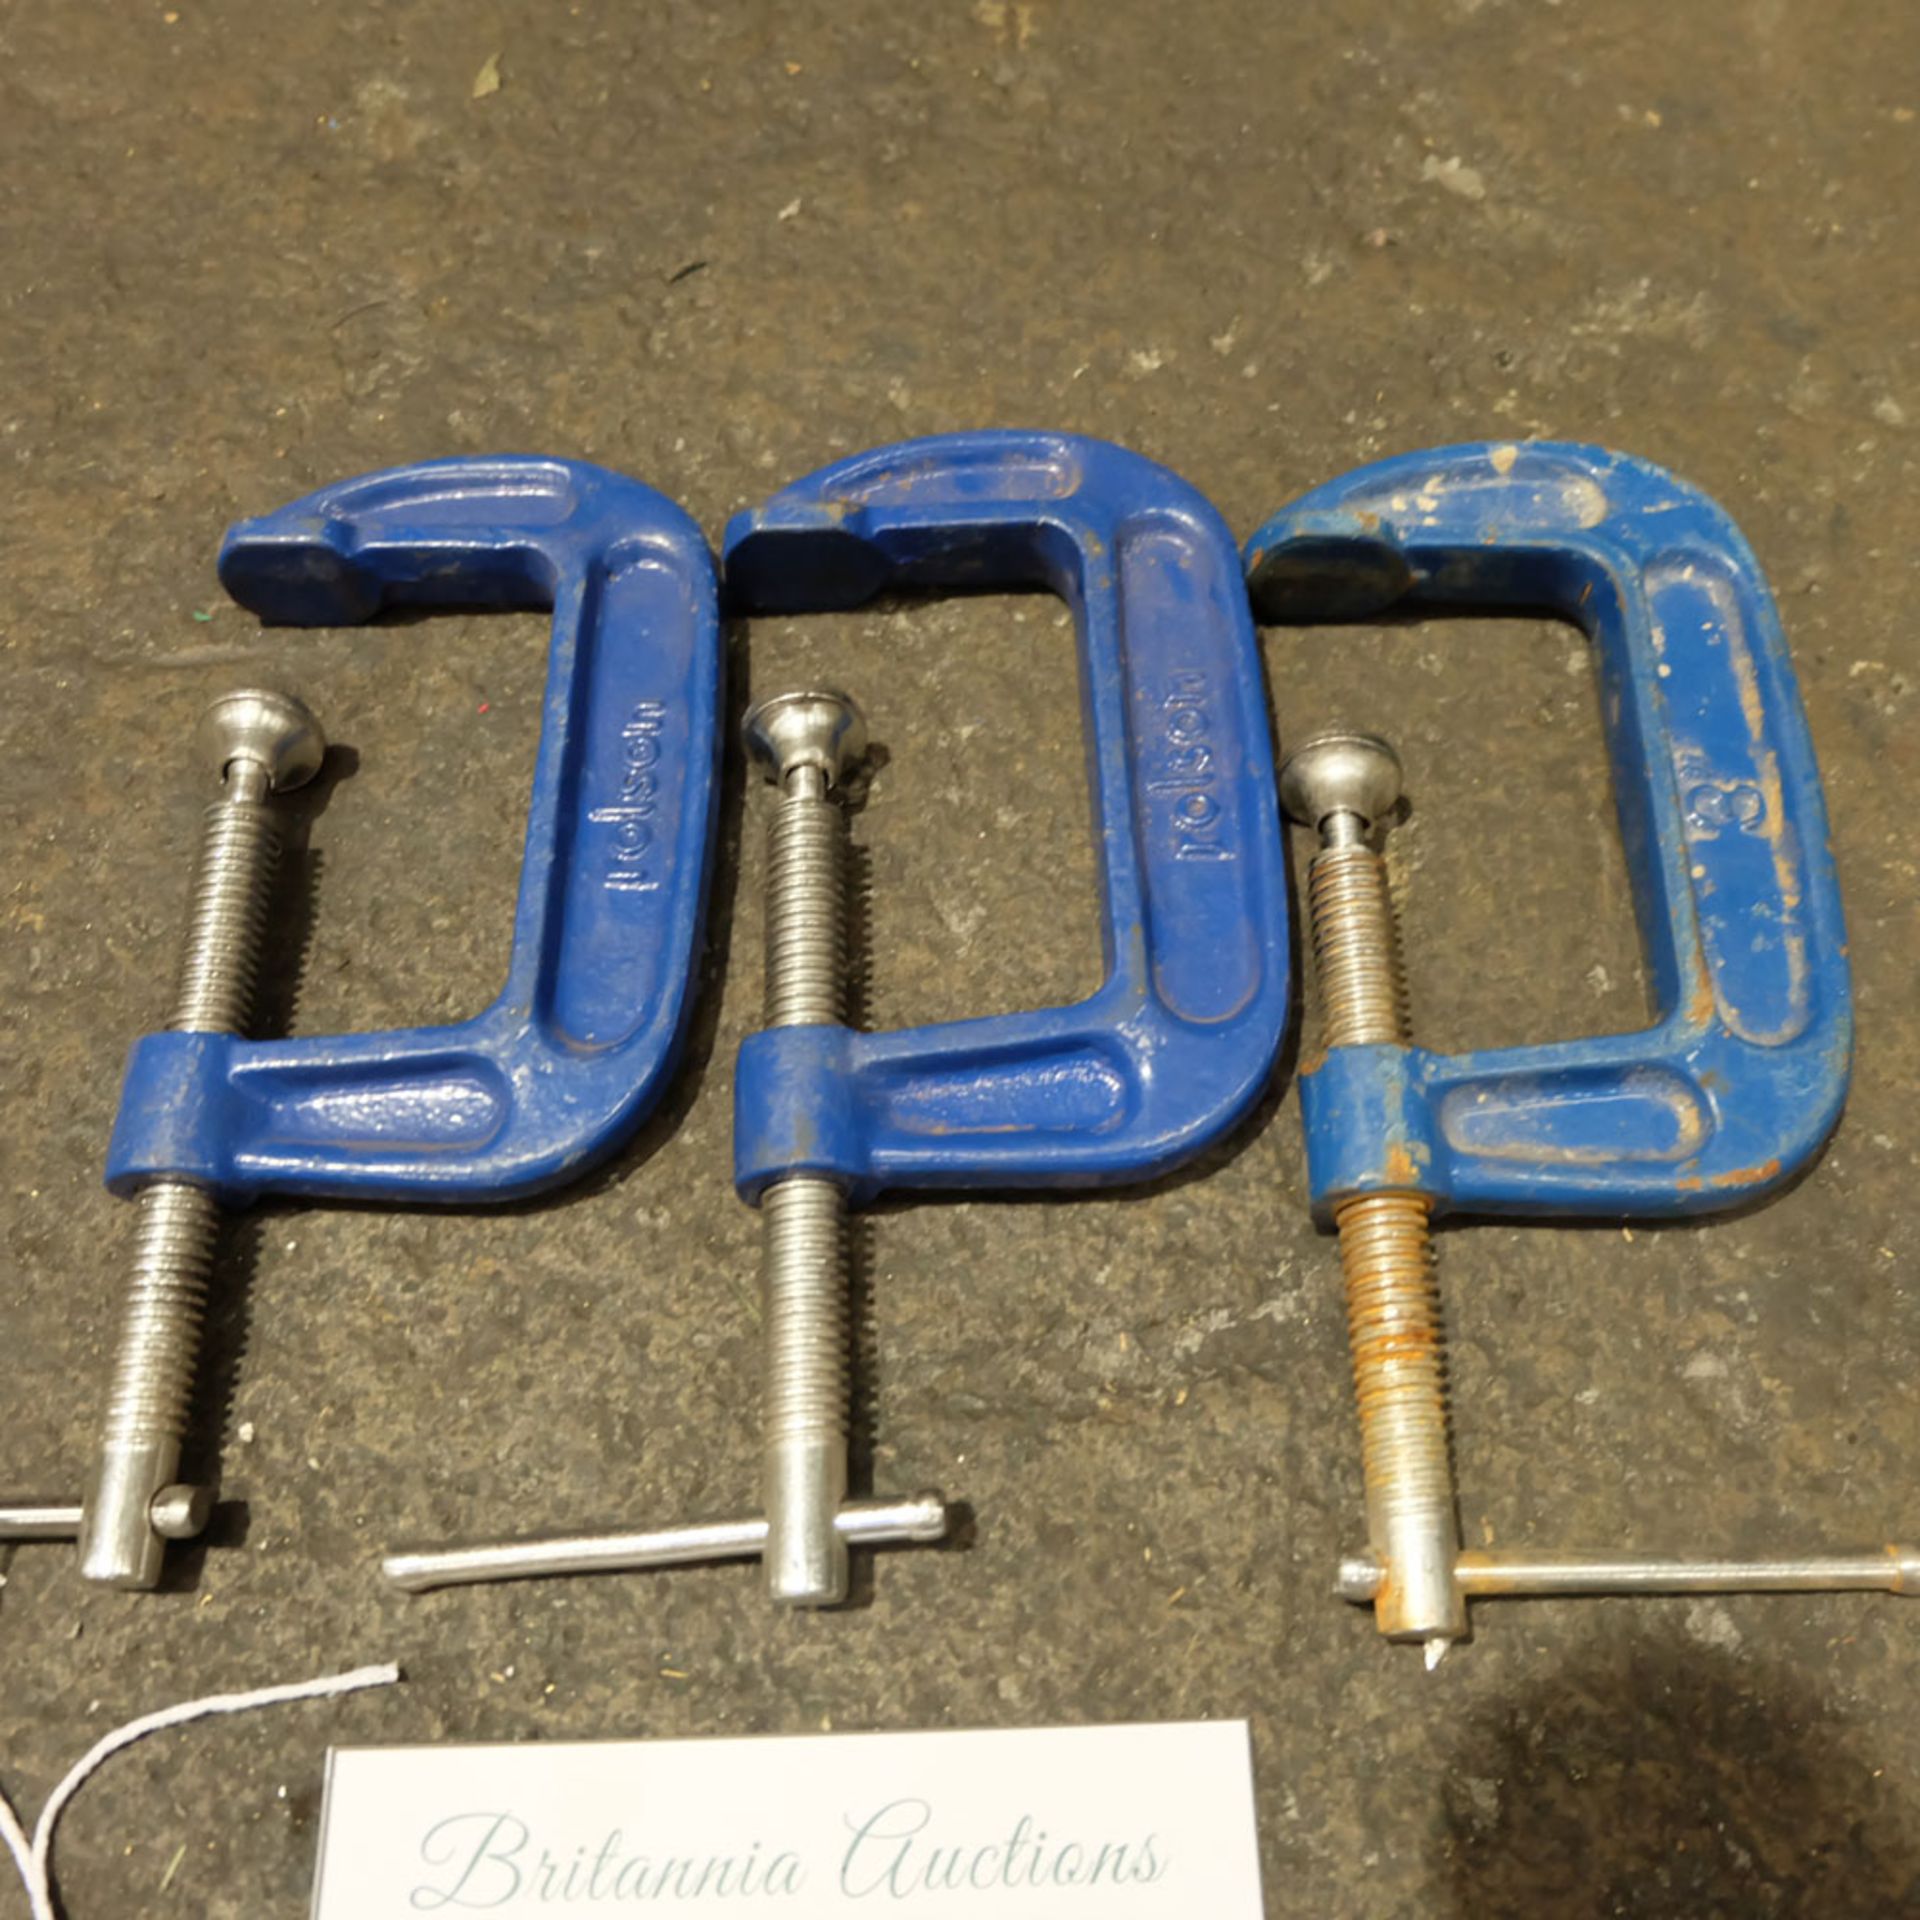 3 x 3" G Clamps - Image 2 of 2